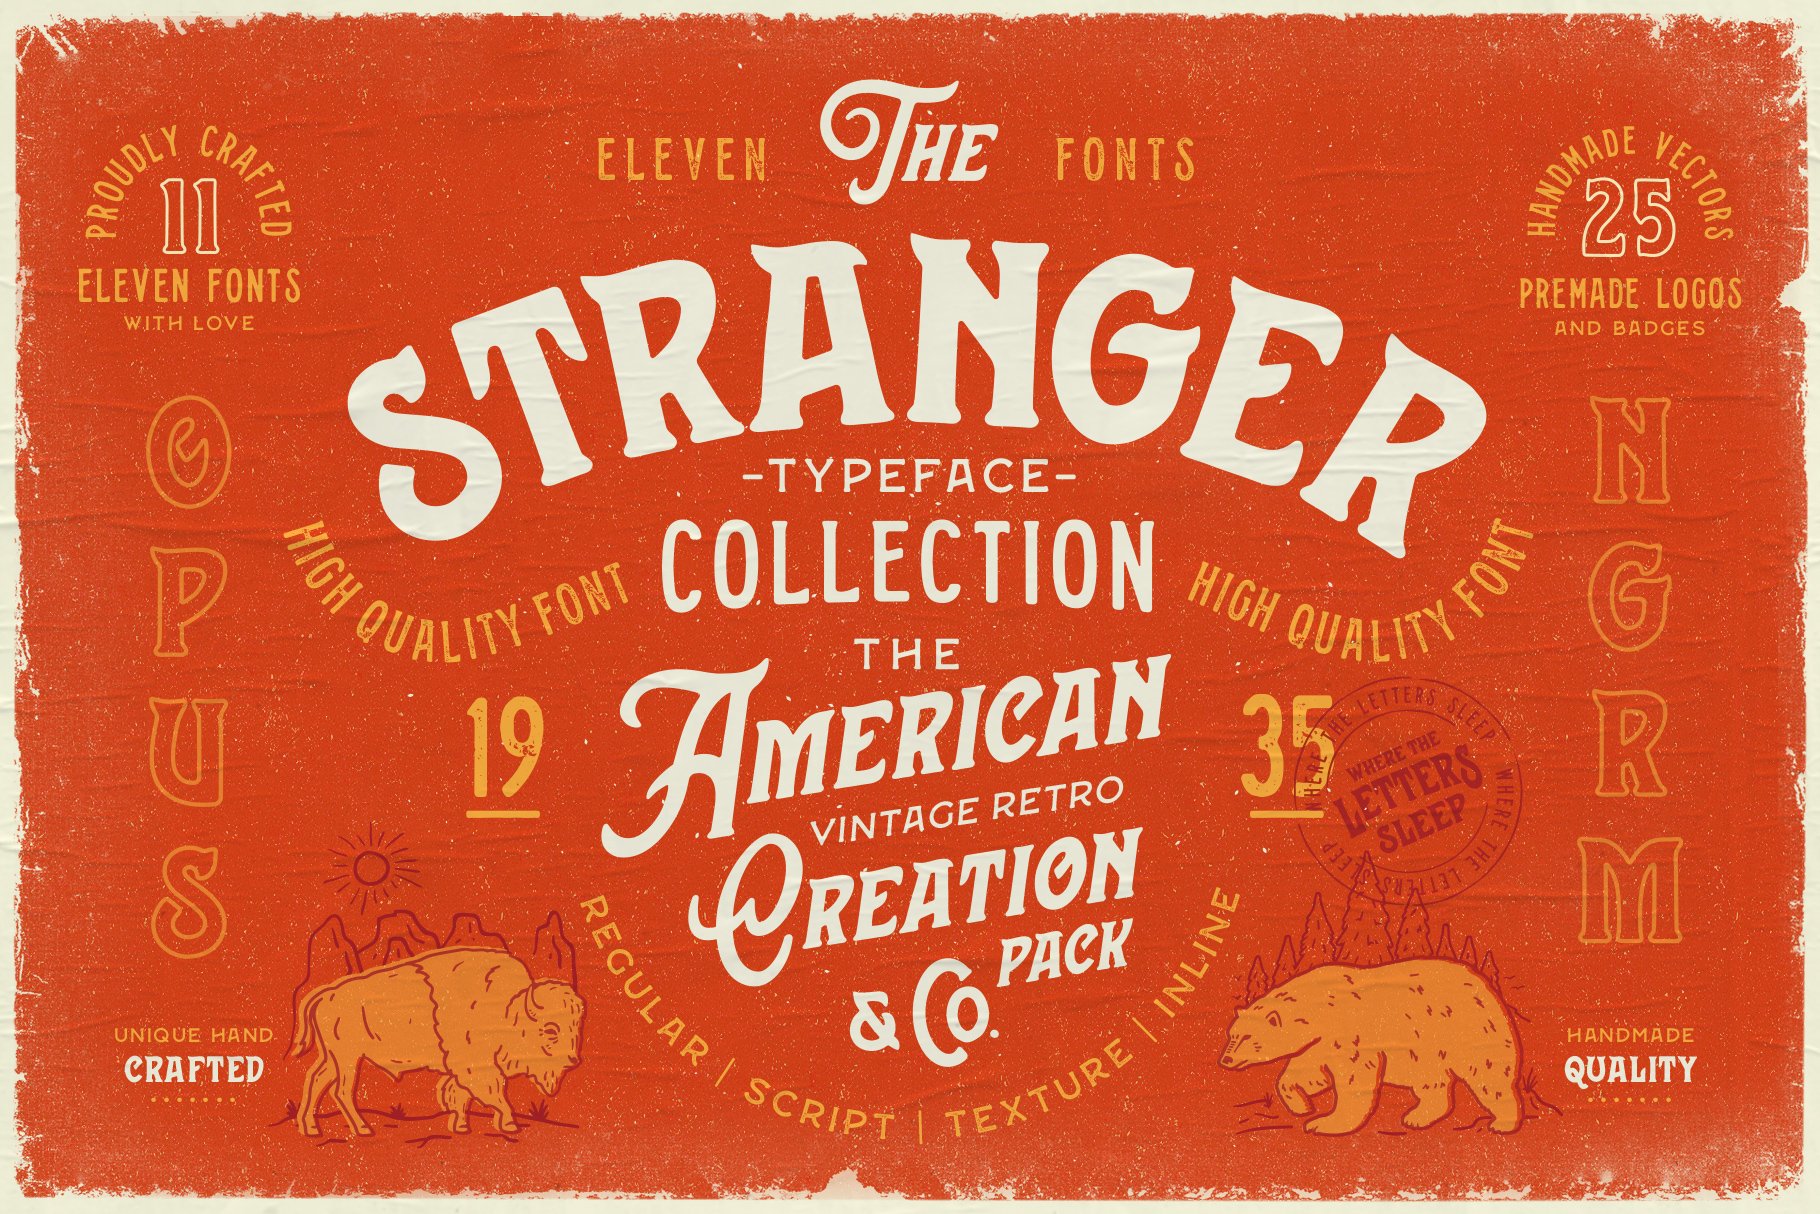 Stranger Font Collection + Extras cover image.